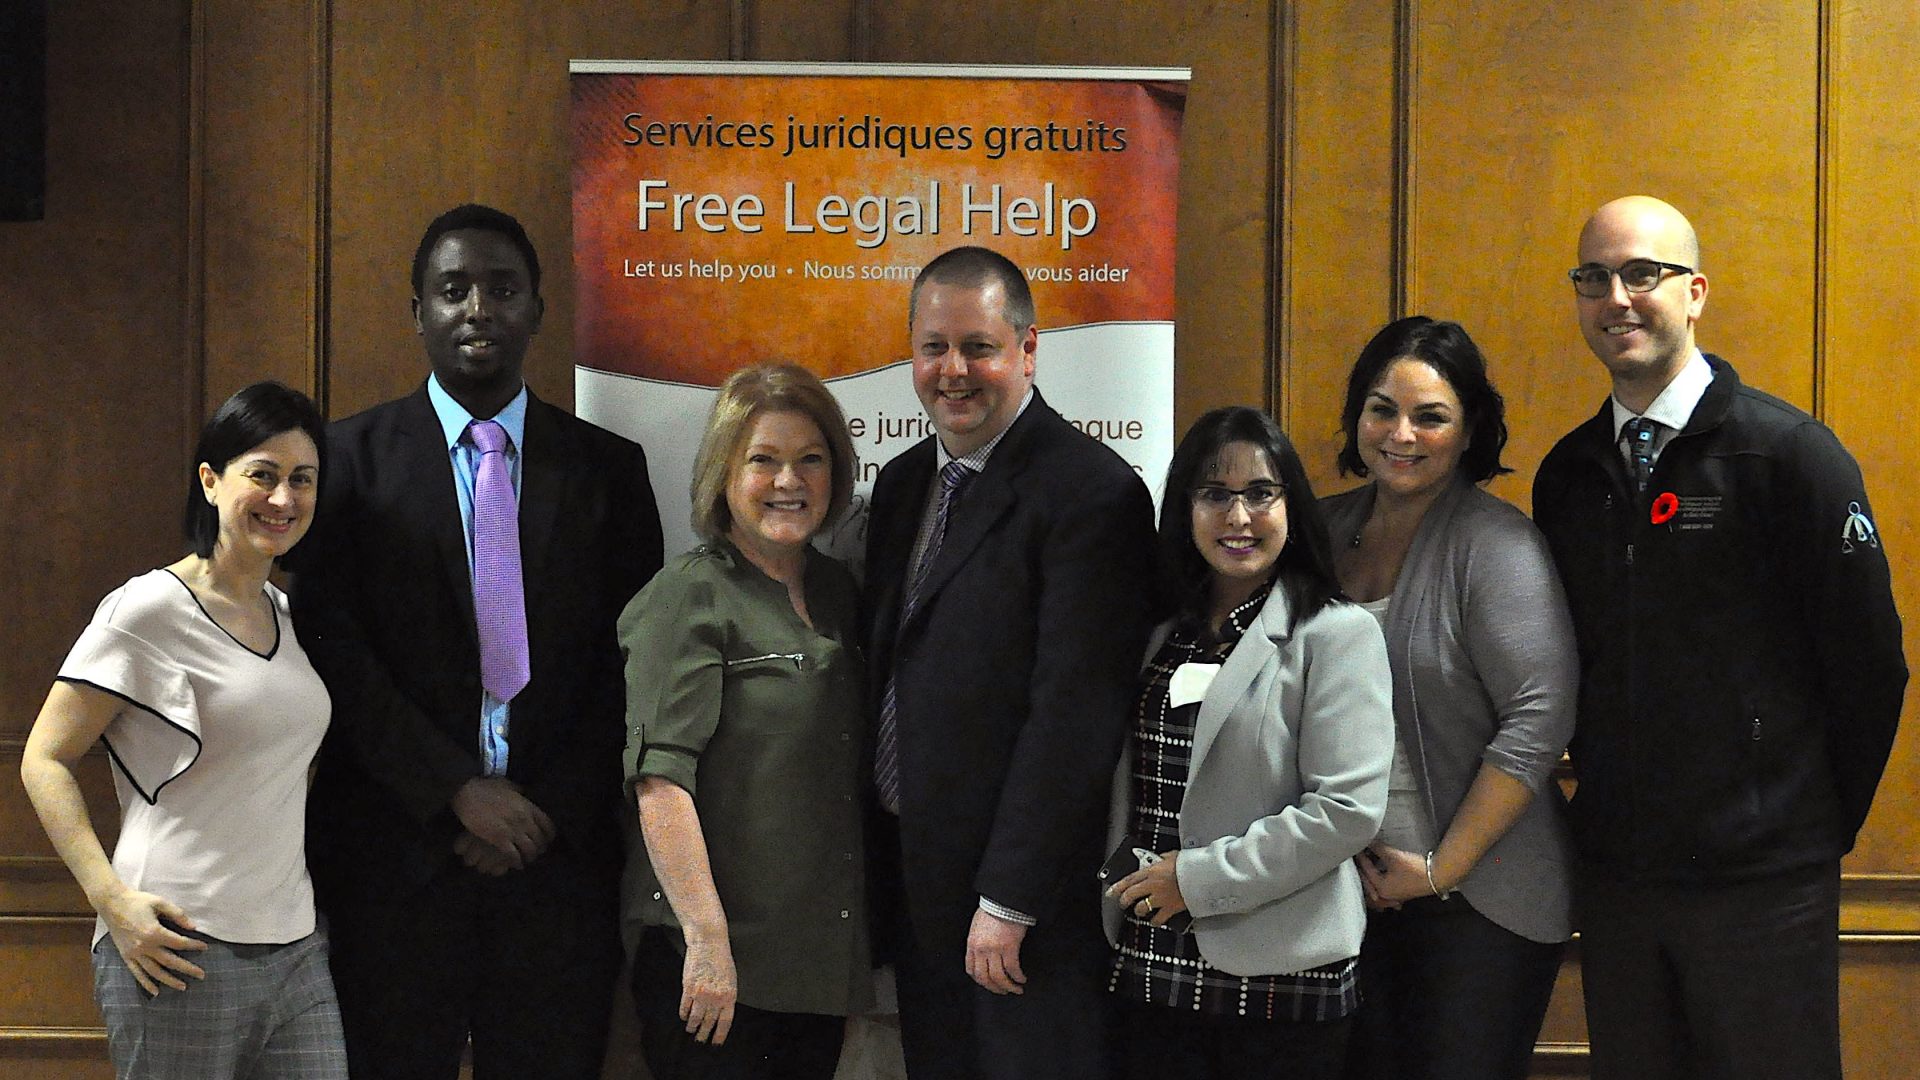 Bilingual Legal Clinic group photo in front of banner